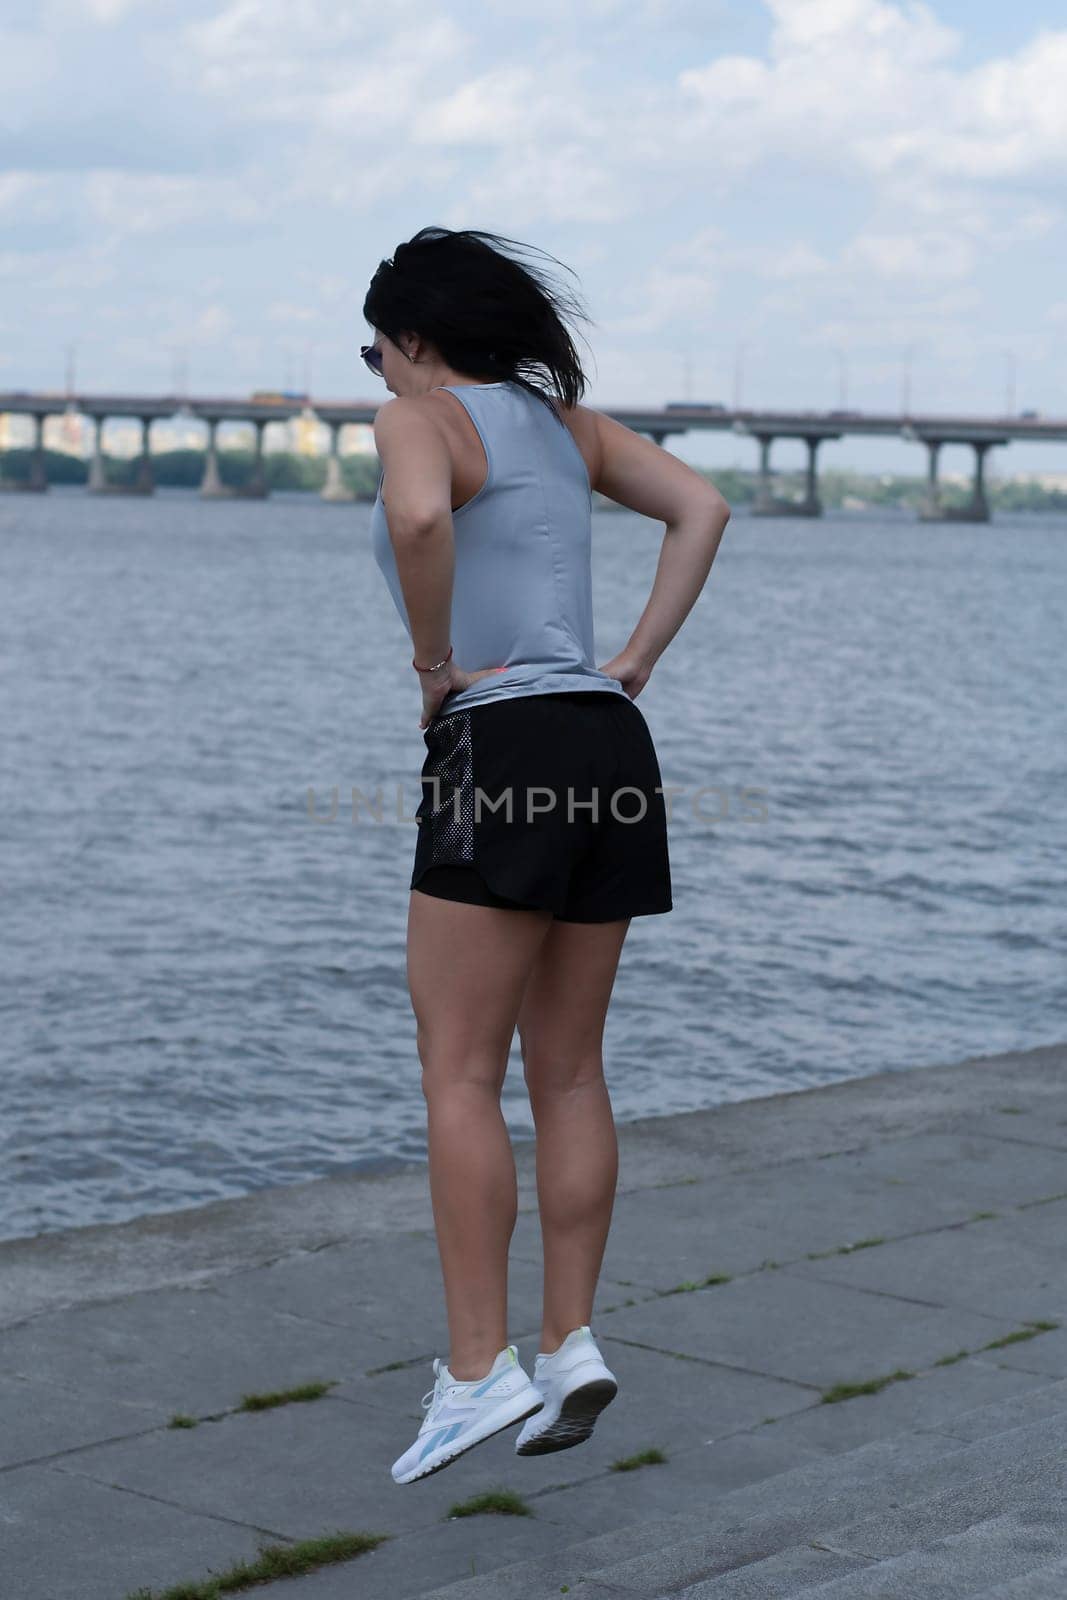 A slender and tall girl jumps on the steps on the embankment by the river. Outdoor sports. Leg workout. Fitness concept.